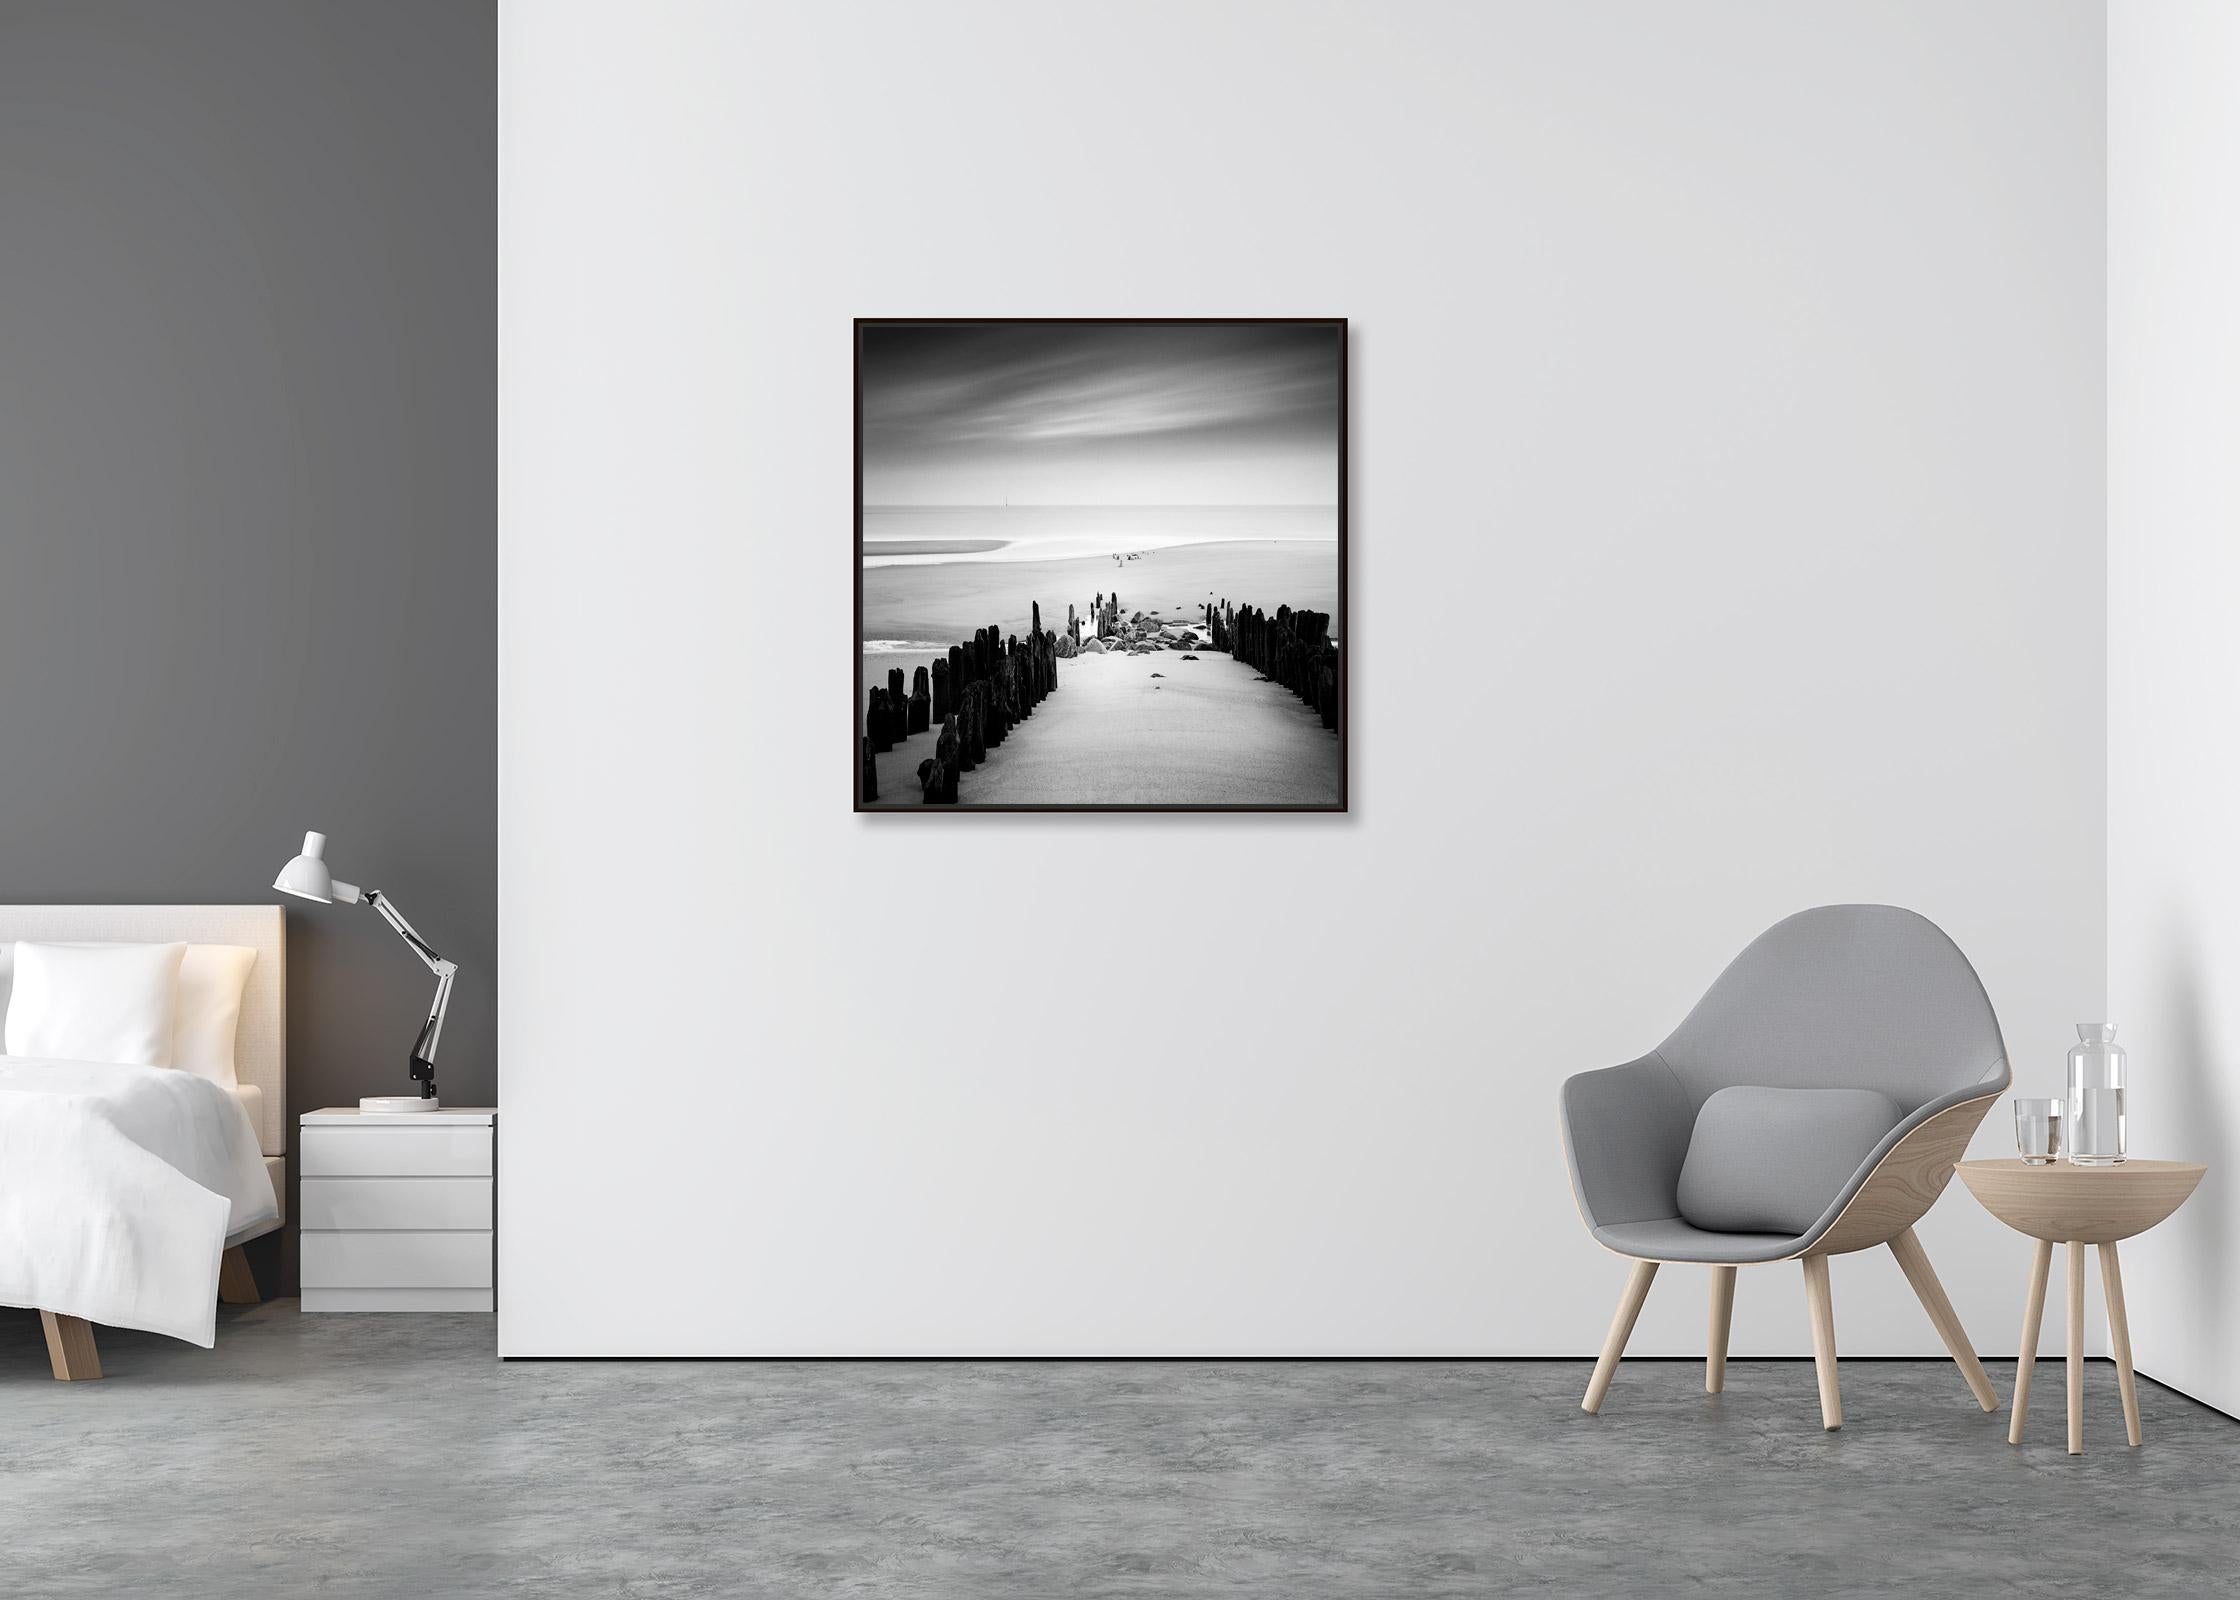 Groyne, Wavebreaker, Beach, Sylt, Germany, black & white waterscape photo print - Abstract Photograph by Gerald Berghammer